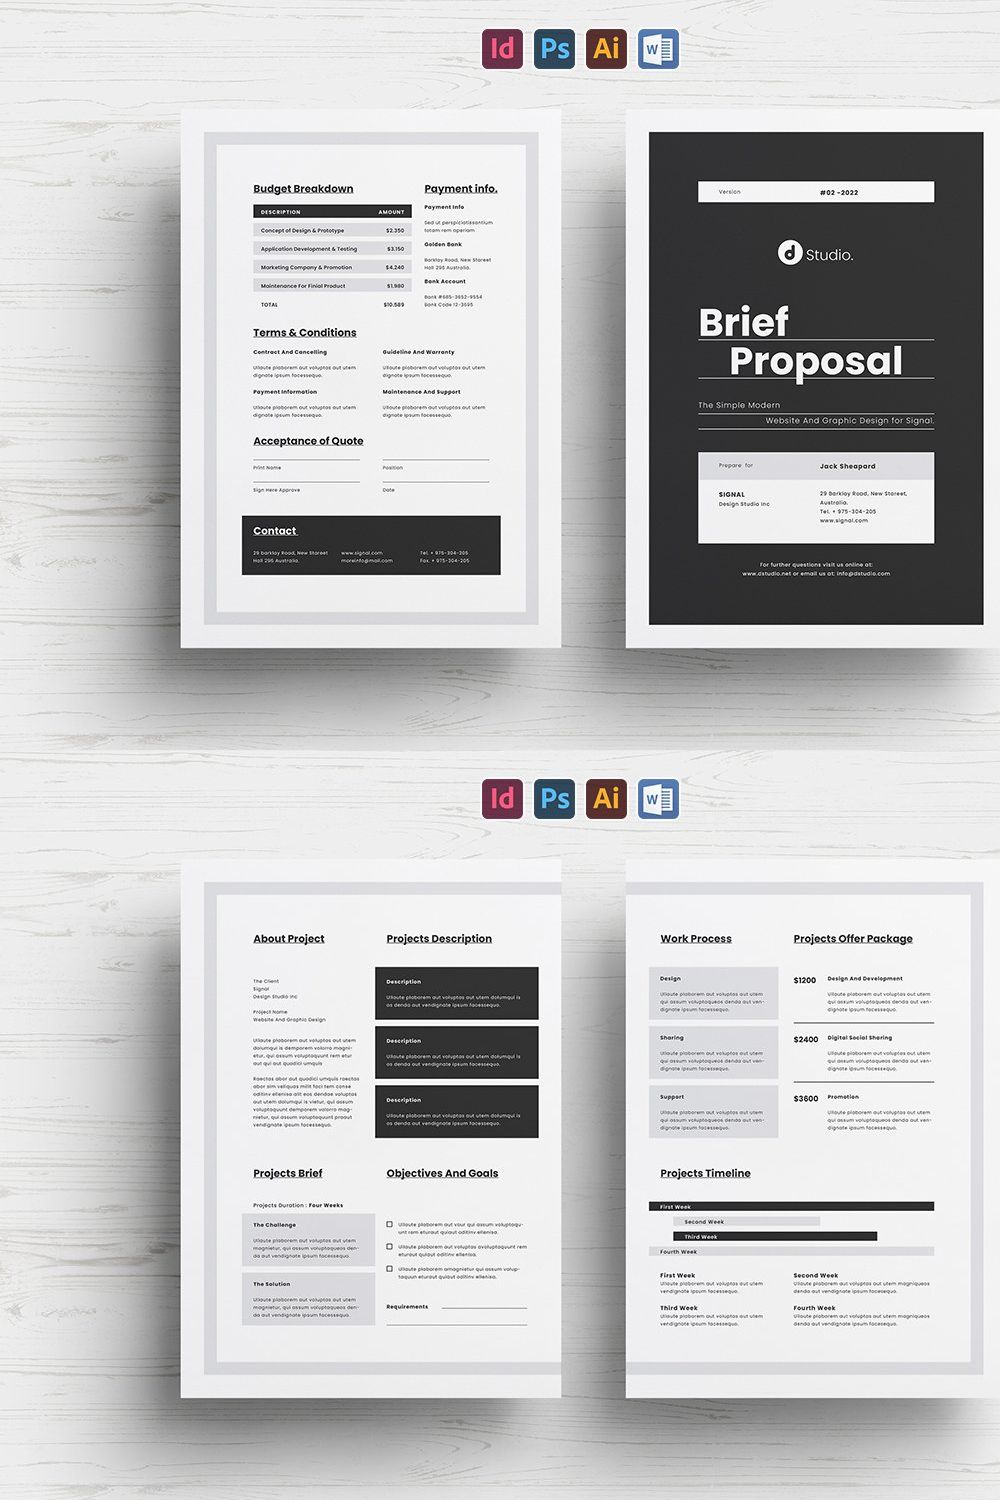 Brief Proposal Templates pinterest preview image.